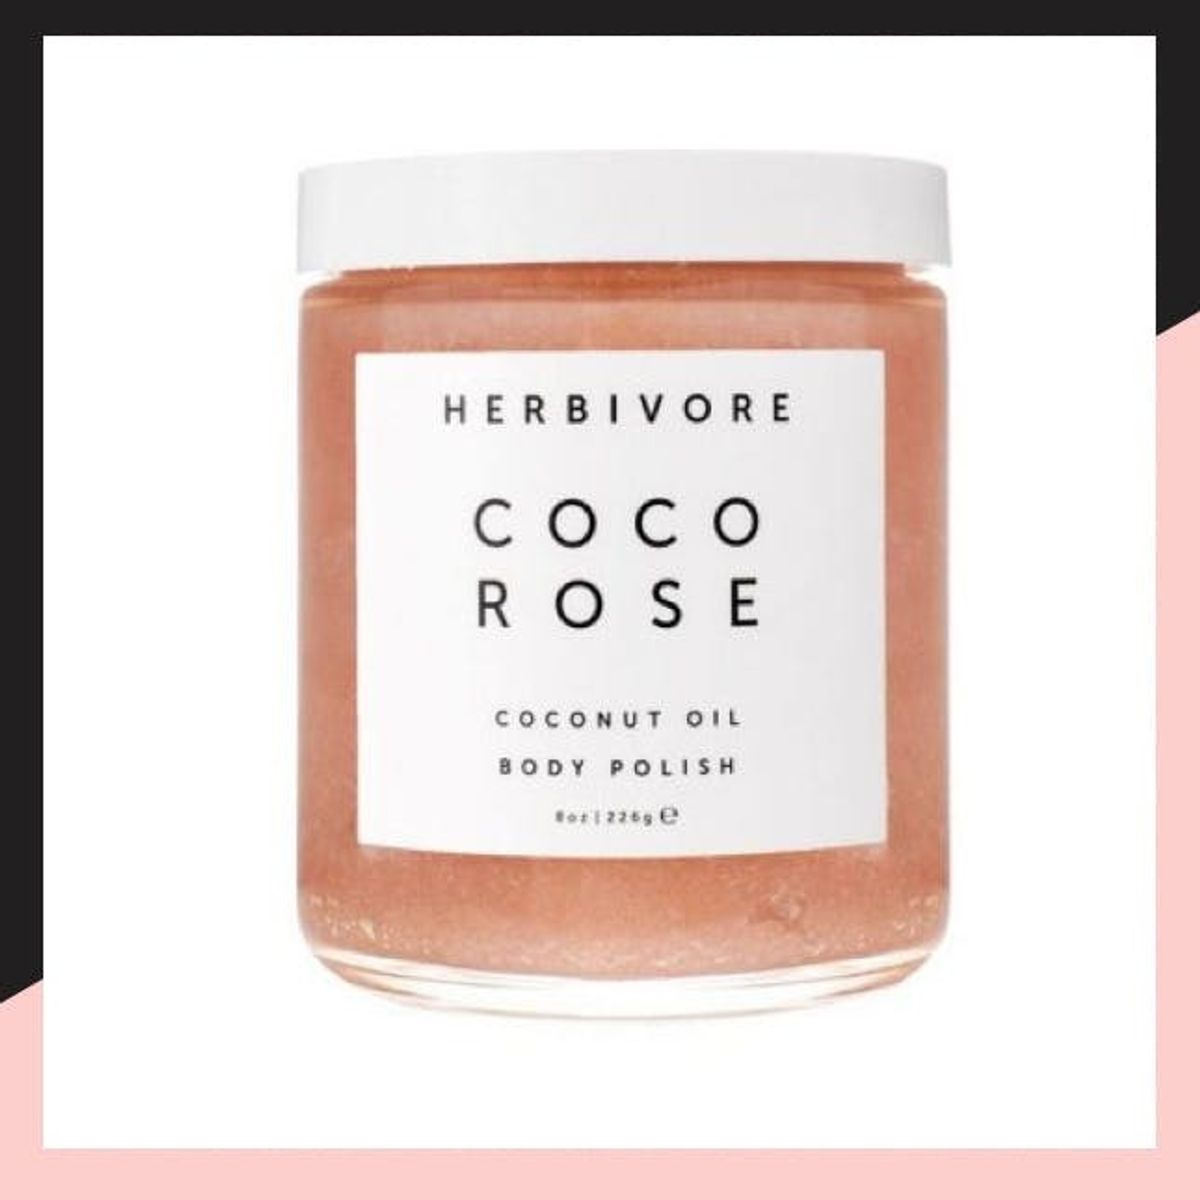 Get Your Skin Ready for Spring With These Kick-Ass Body Scrubs